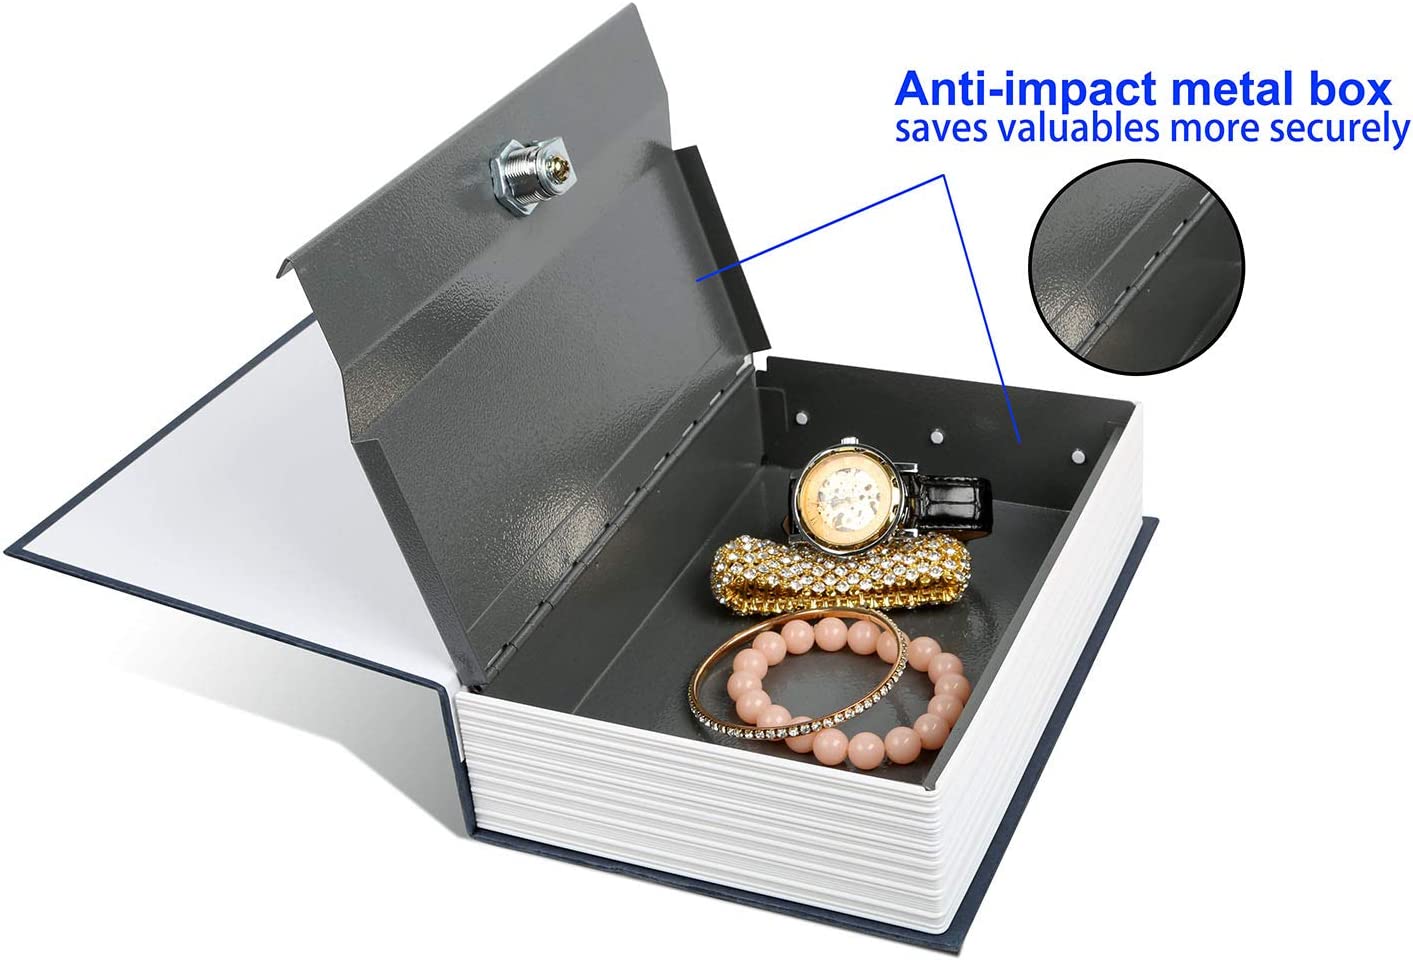 An open security book safe showing jewelry and a watch inside with text that reads, "Anti impact metal box saves valuables more securely"